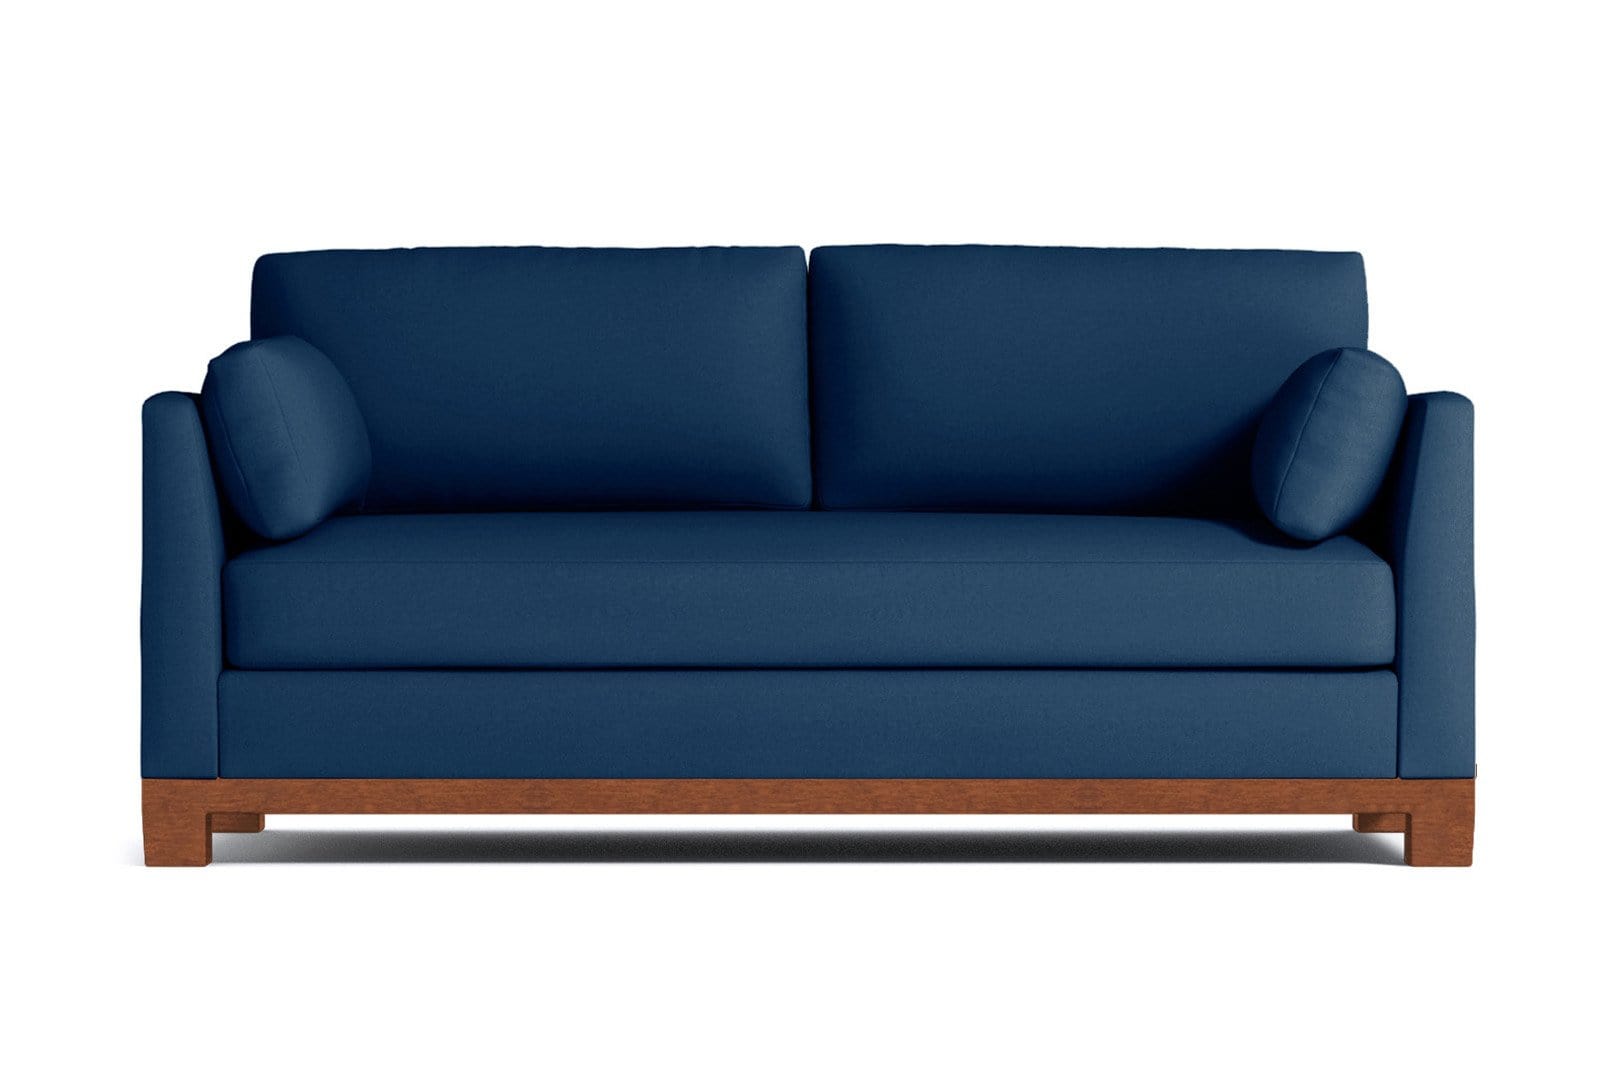 Avalon Sofa - Blue -  Modern Couch Made in the USA - Sold by Apt2B